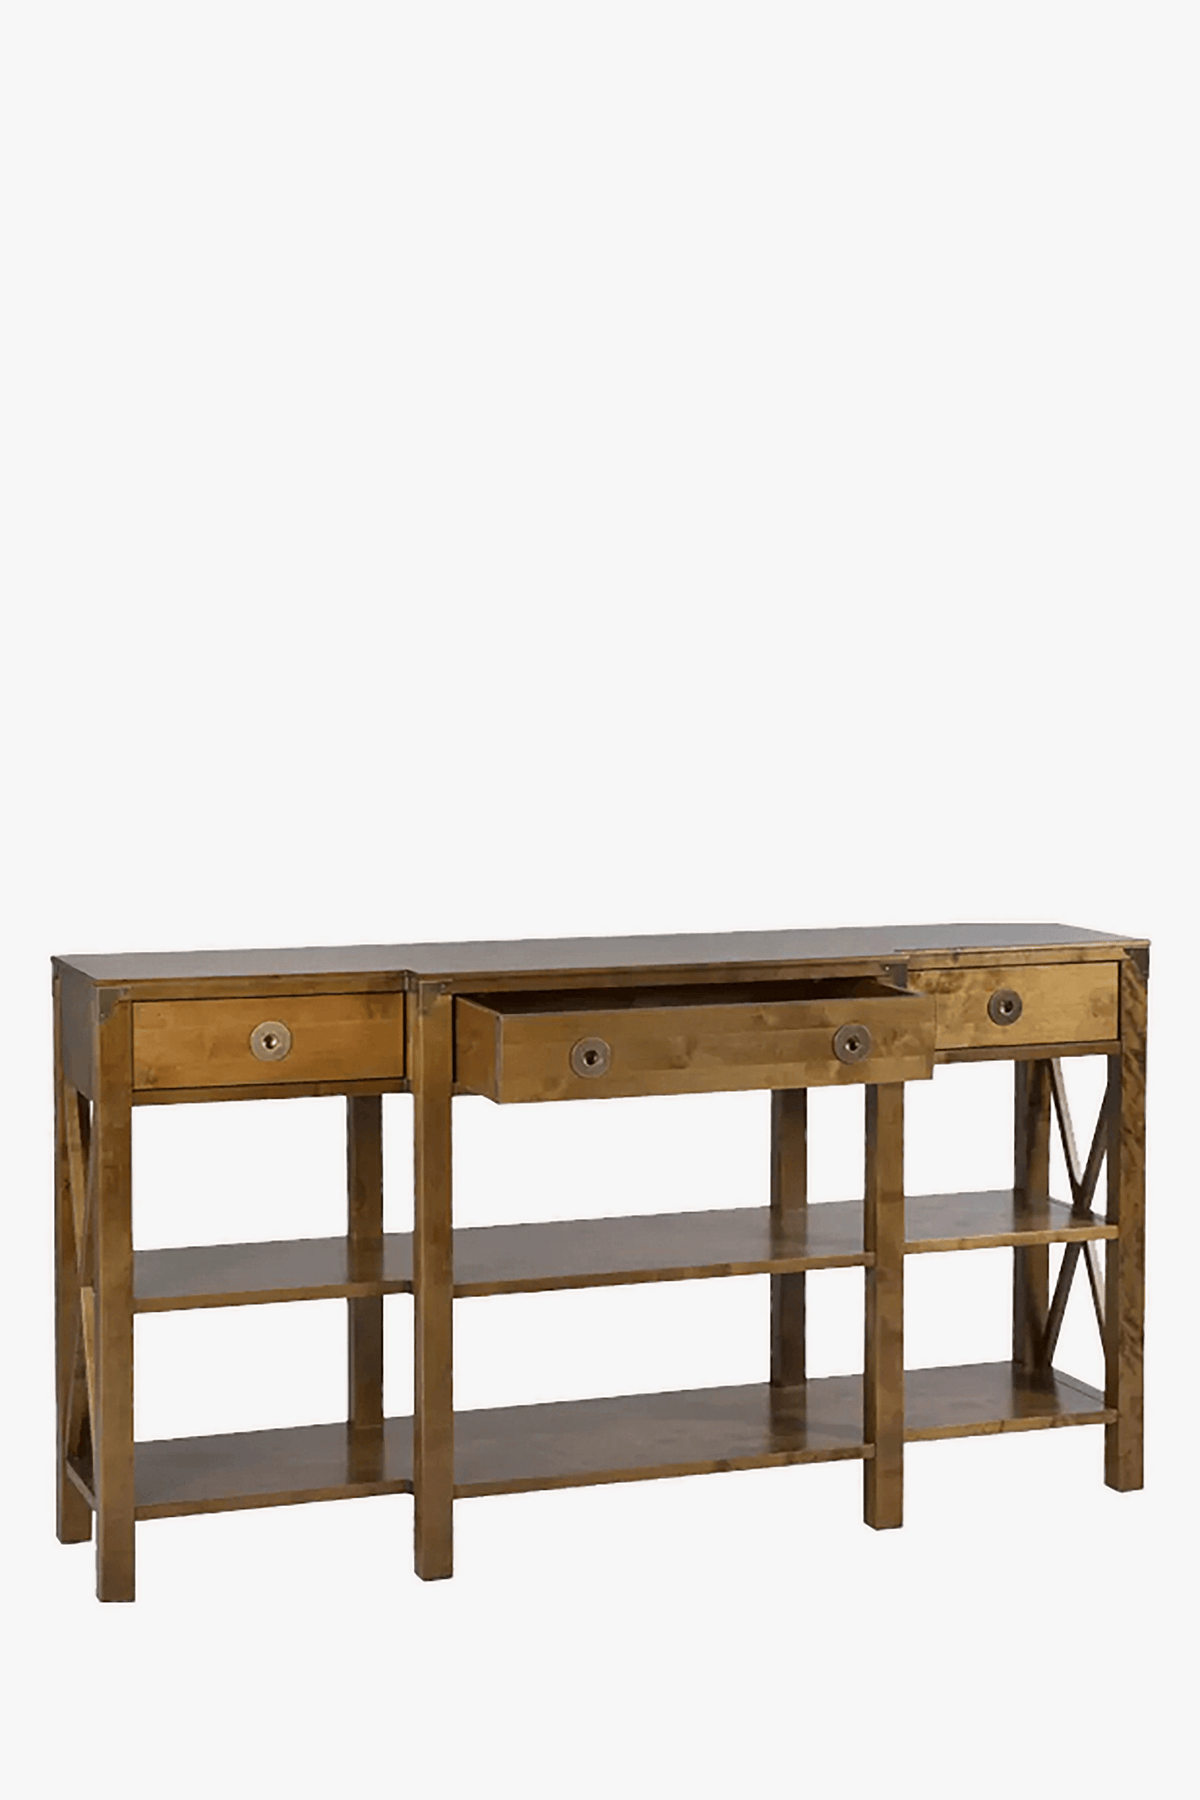 Balmoral 3 Drawer Triple Console Table